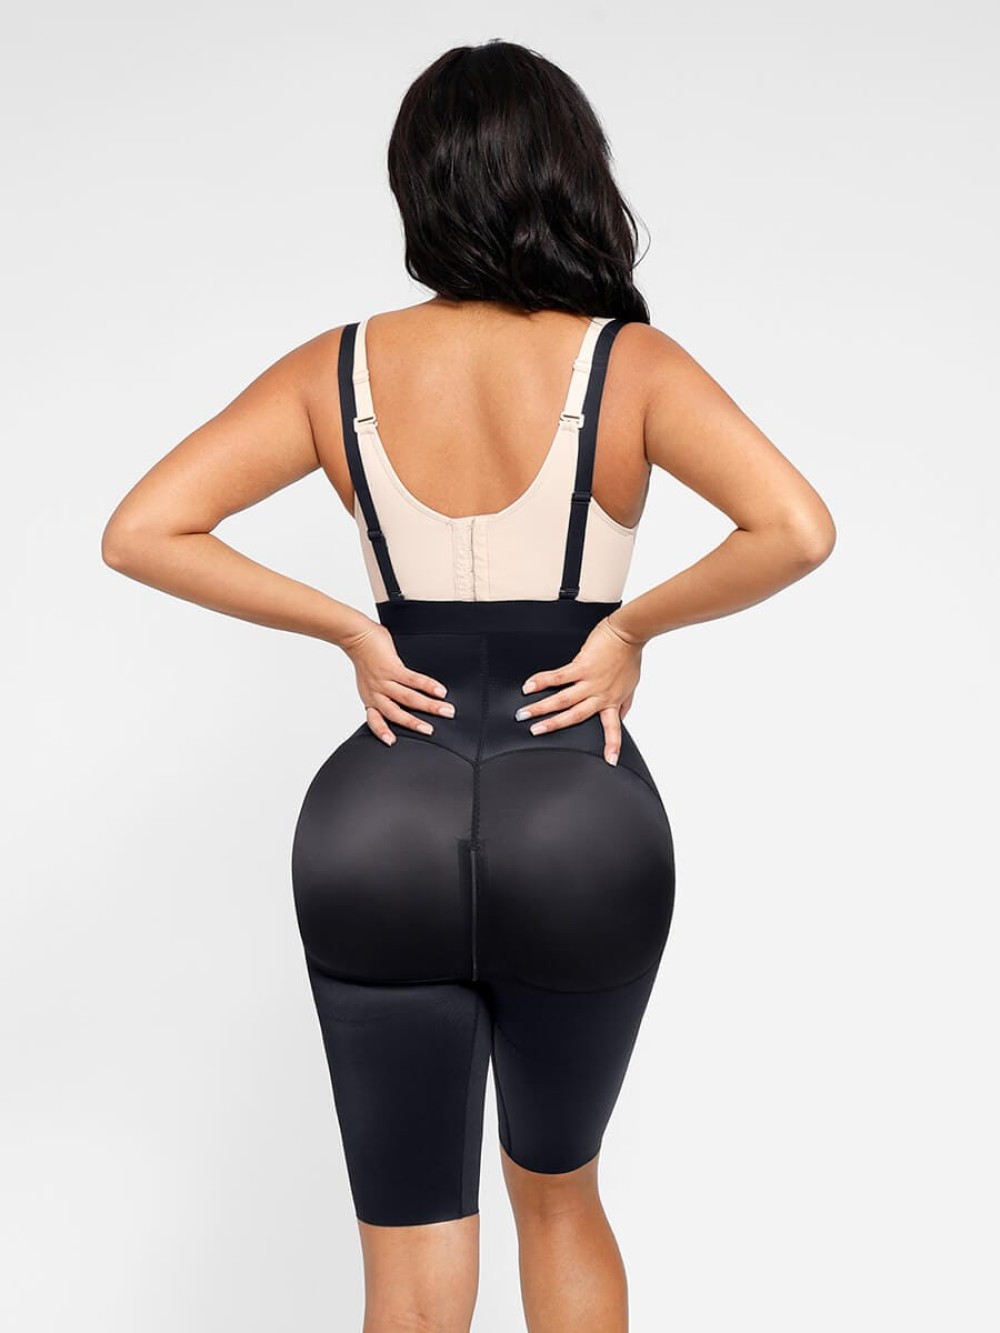 Body Shaper clips inside for post-operative wear and removable shoulder straps